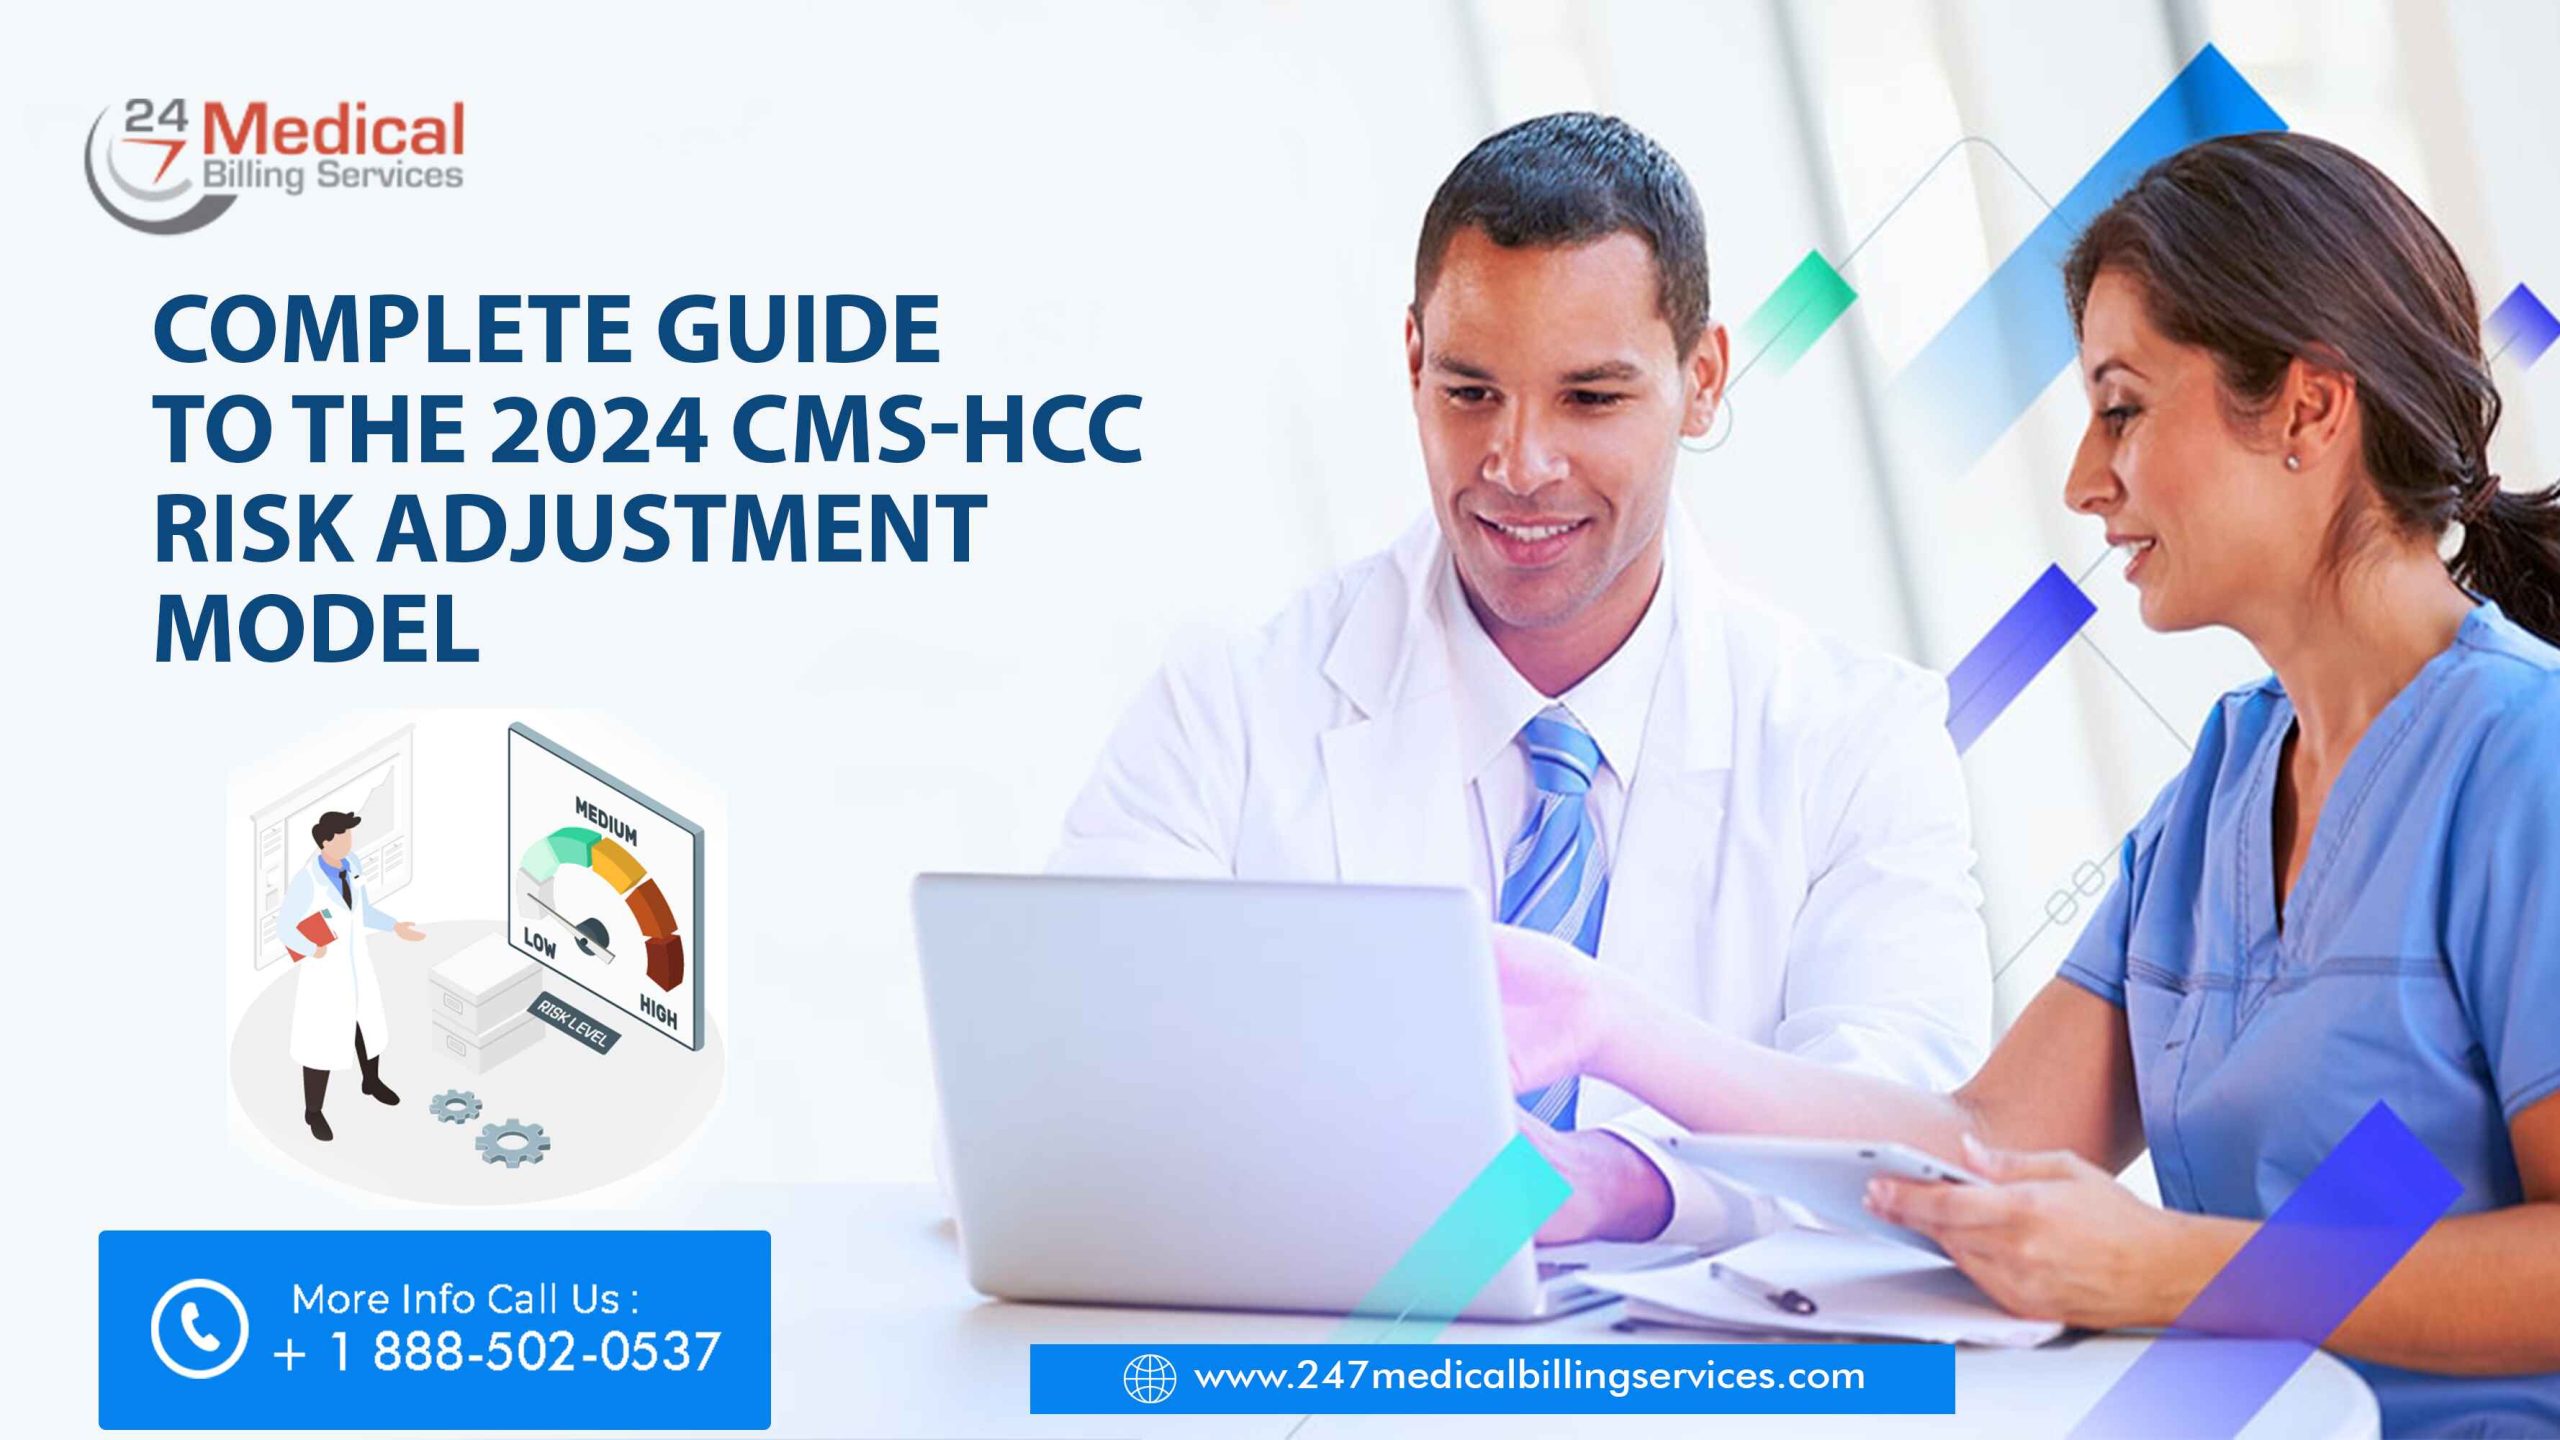  Complete Guide to the 2024 CMS-HCC Risk Adjustment Model